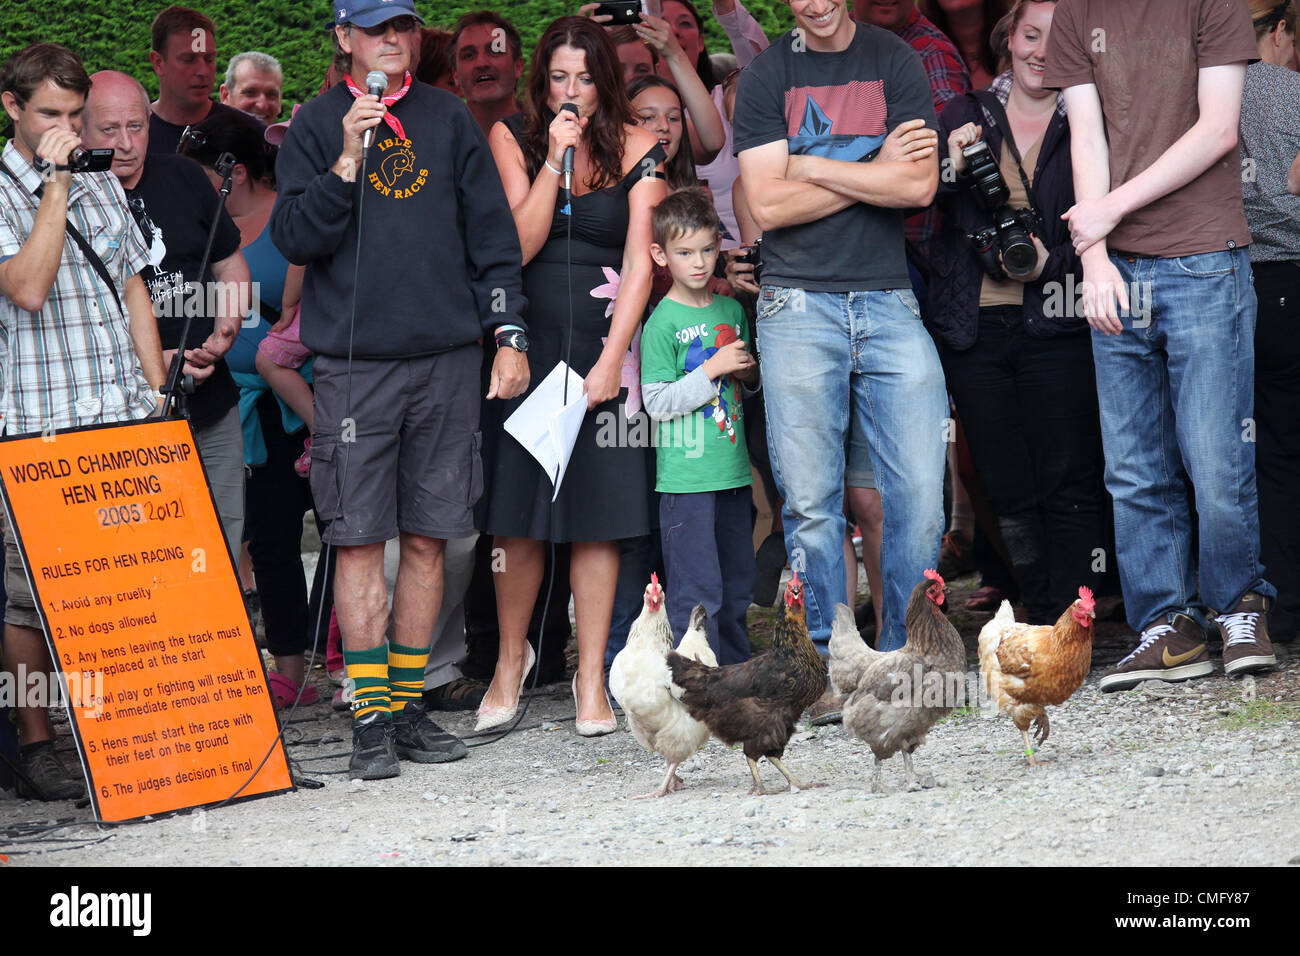 Annual World Hen Racing Championship held on August 4th 2012 at the Barley Mow Public House in the Derbyshire Peak District Village of Bonsall.  Historic event going back over 100 years. Stock Photo